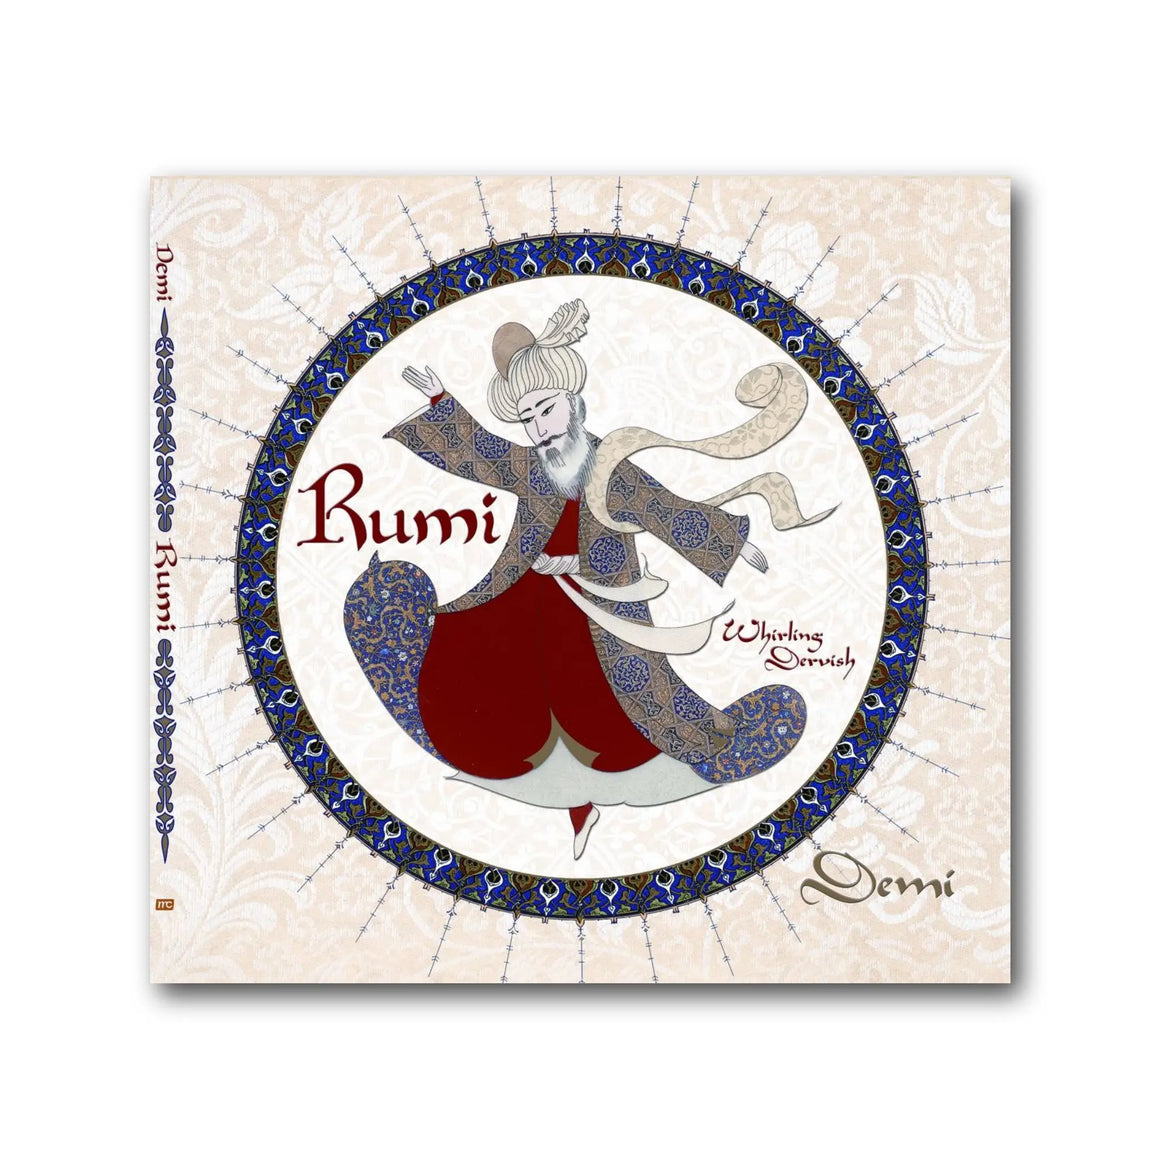 Rumi: Whirling Dervish - Book